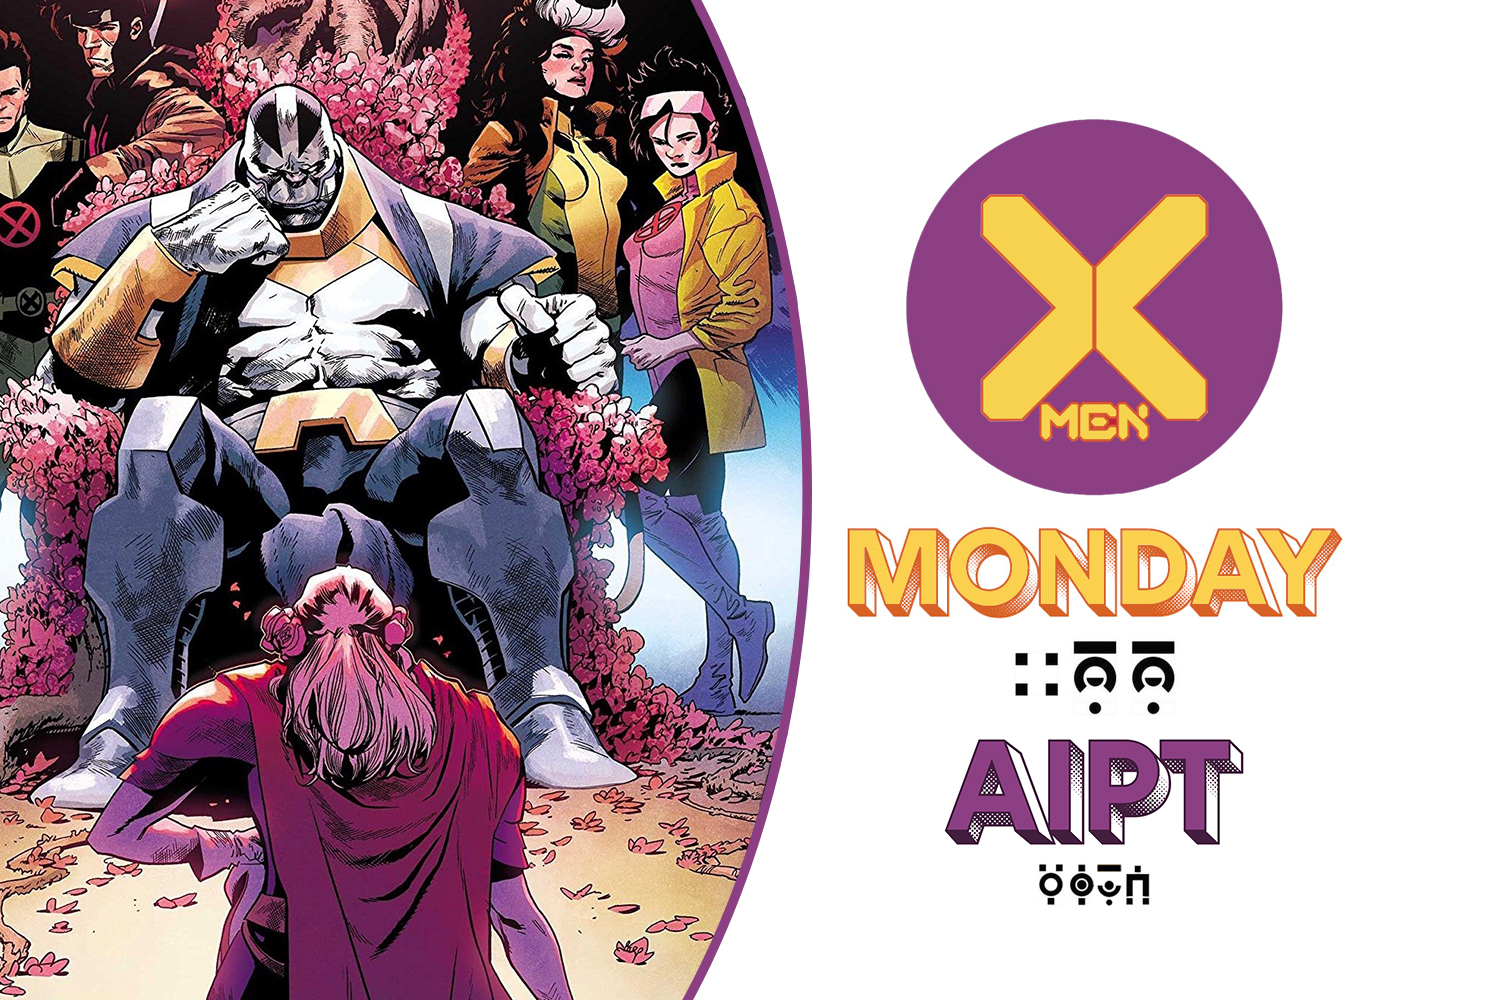 X-Men Monday #42 - Tini Howard answers your Excalibur questions